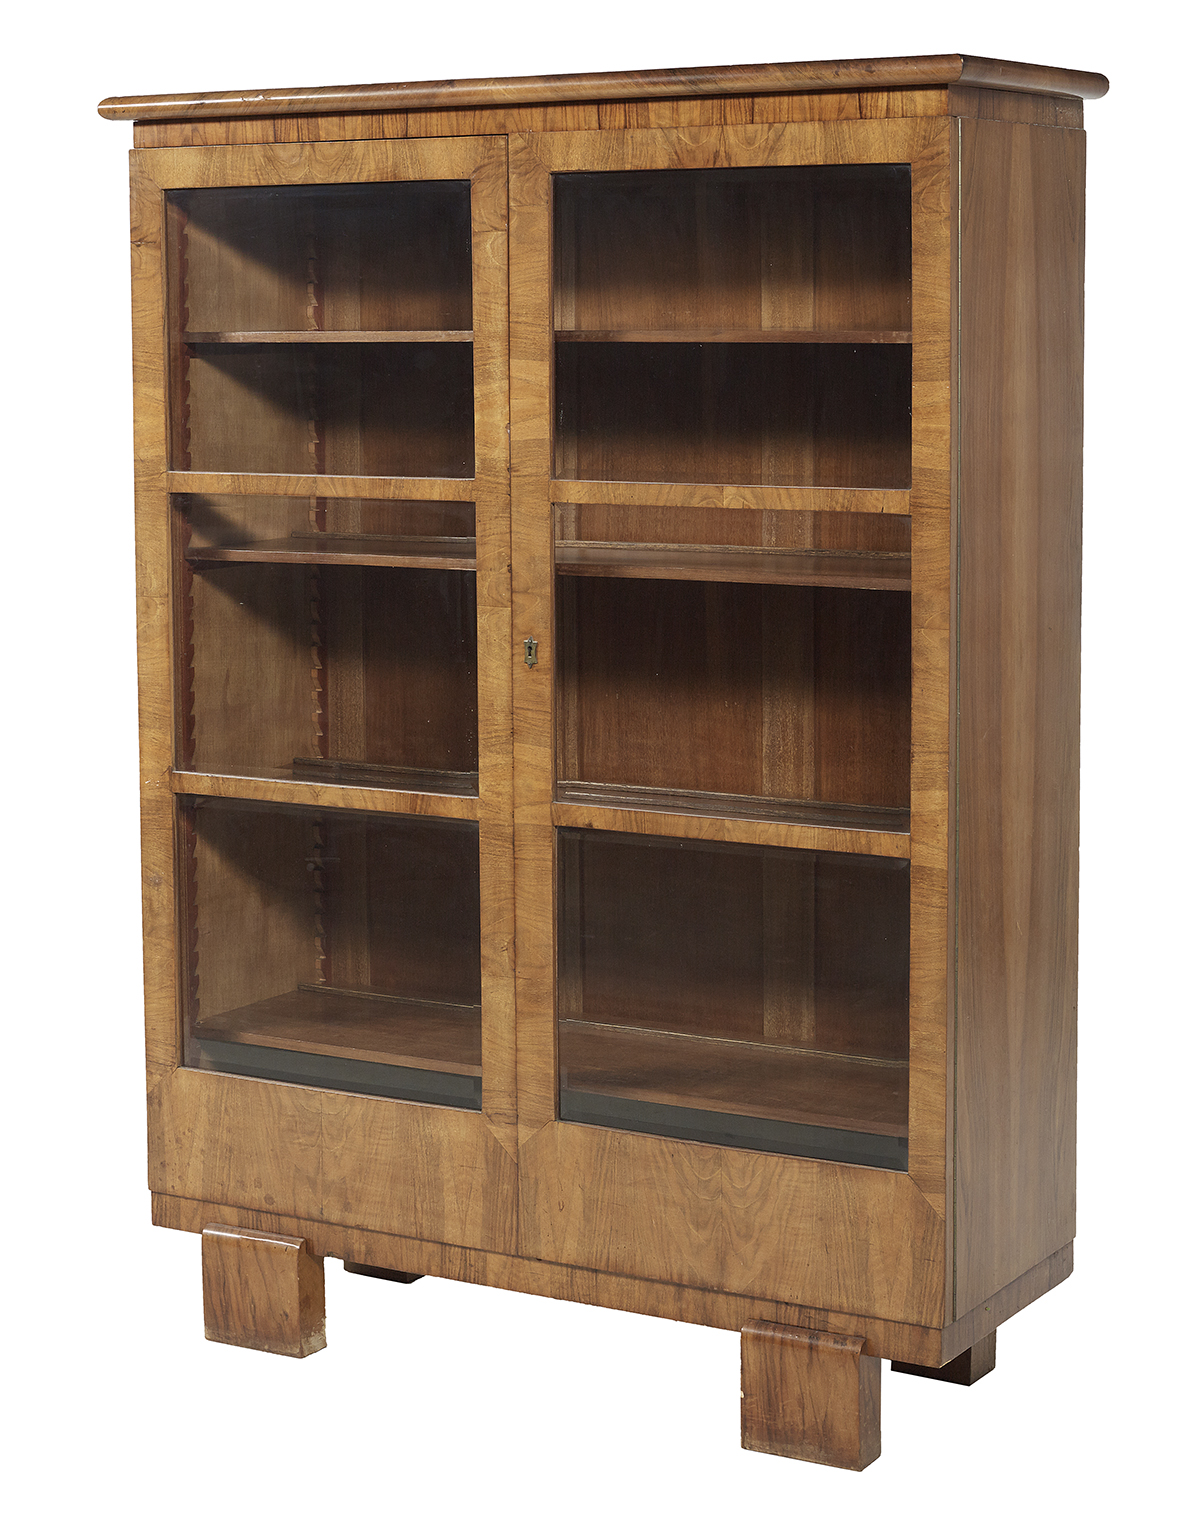 Art Deco Fruitwood Cabinet - Image 2 of 3